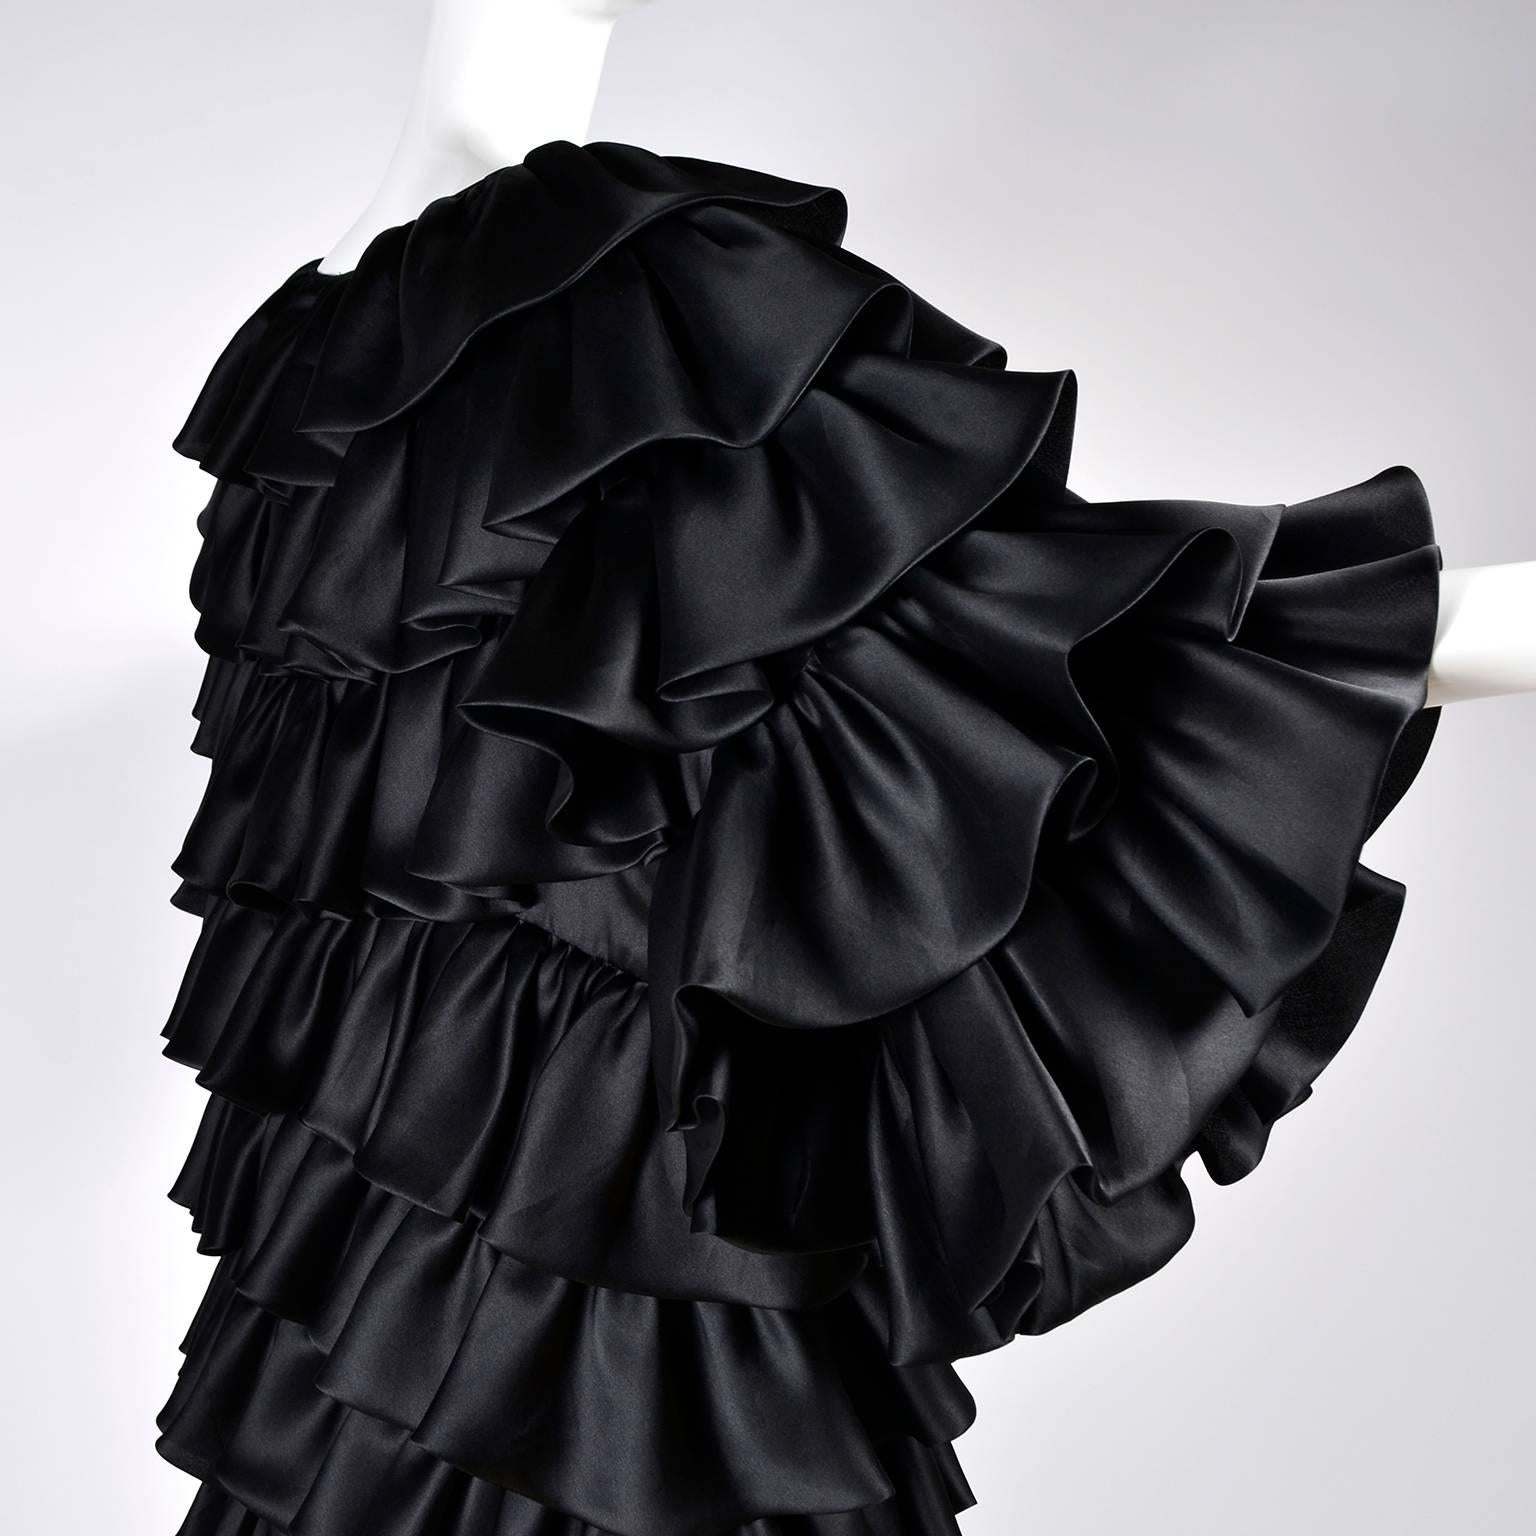 This ruffled black vintage Oscar de la Renta coat was purchased at Lord & Taylor and made in the USA in the early 1990s. This gorgeous evening coat has tiers of black ruffles and is lined in fine organza.  It's hard to photograph the way the